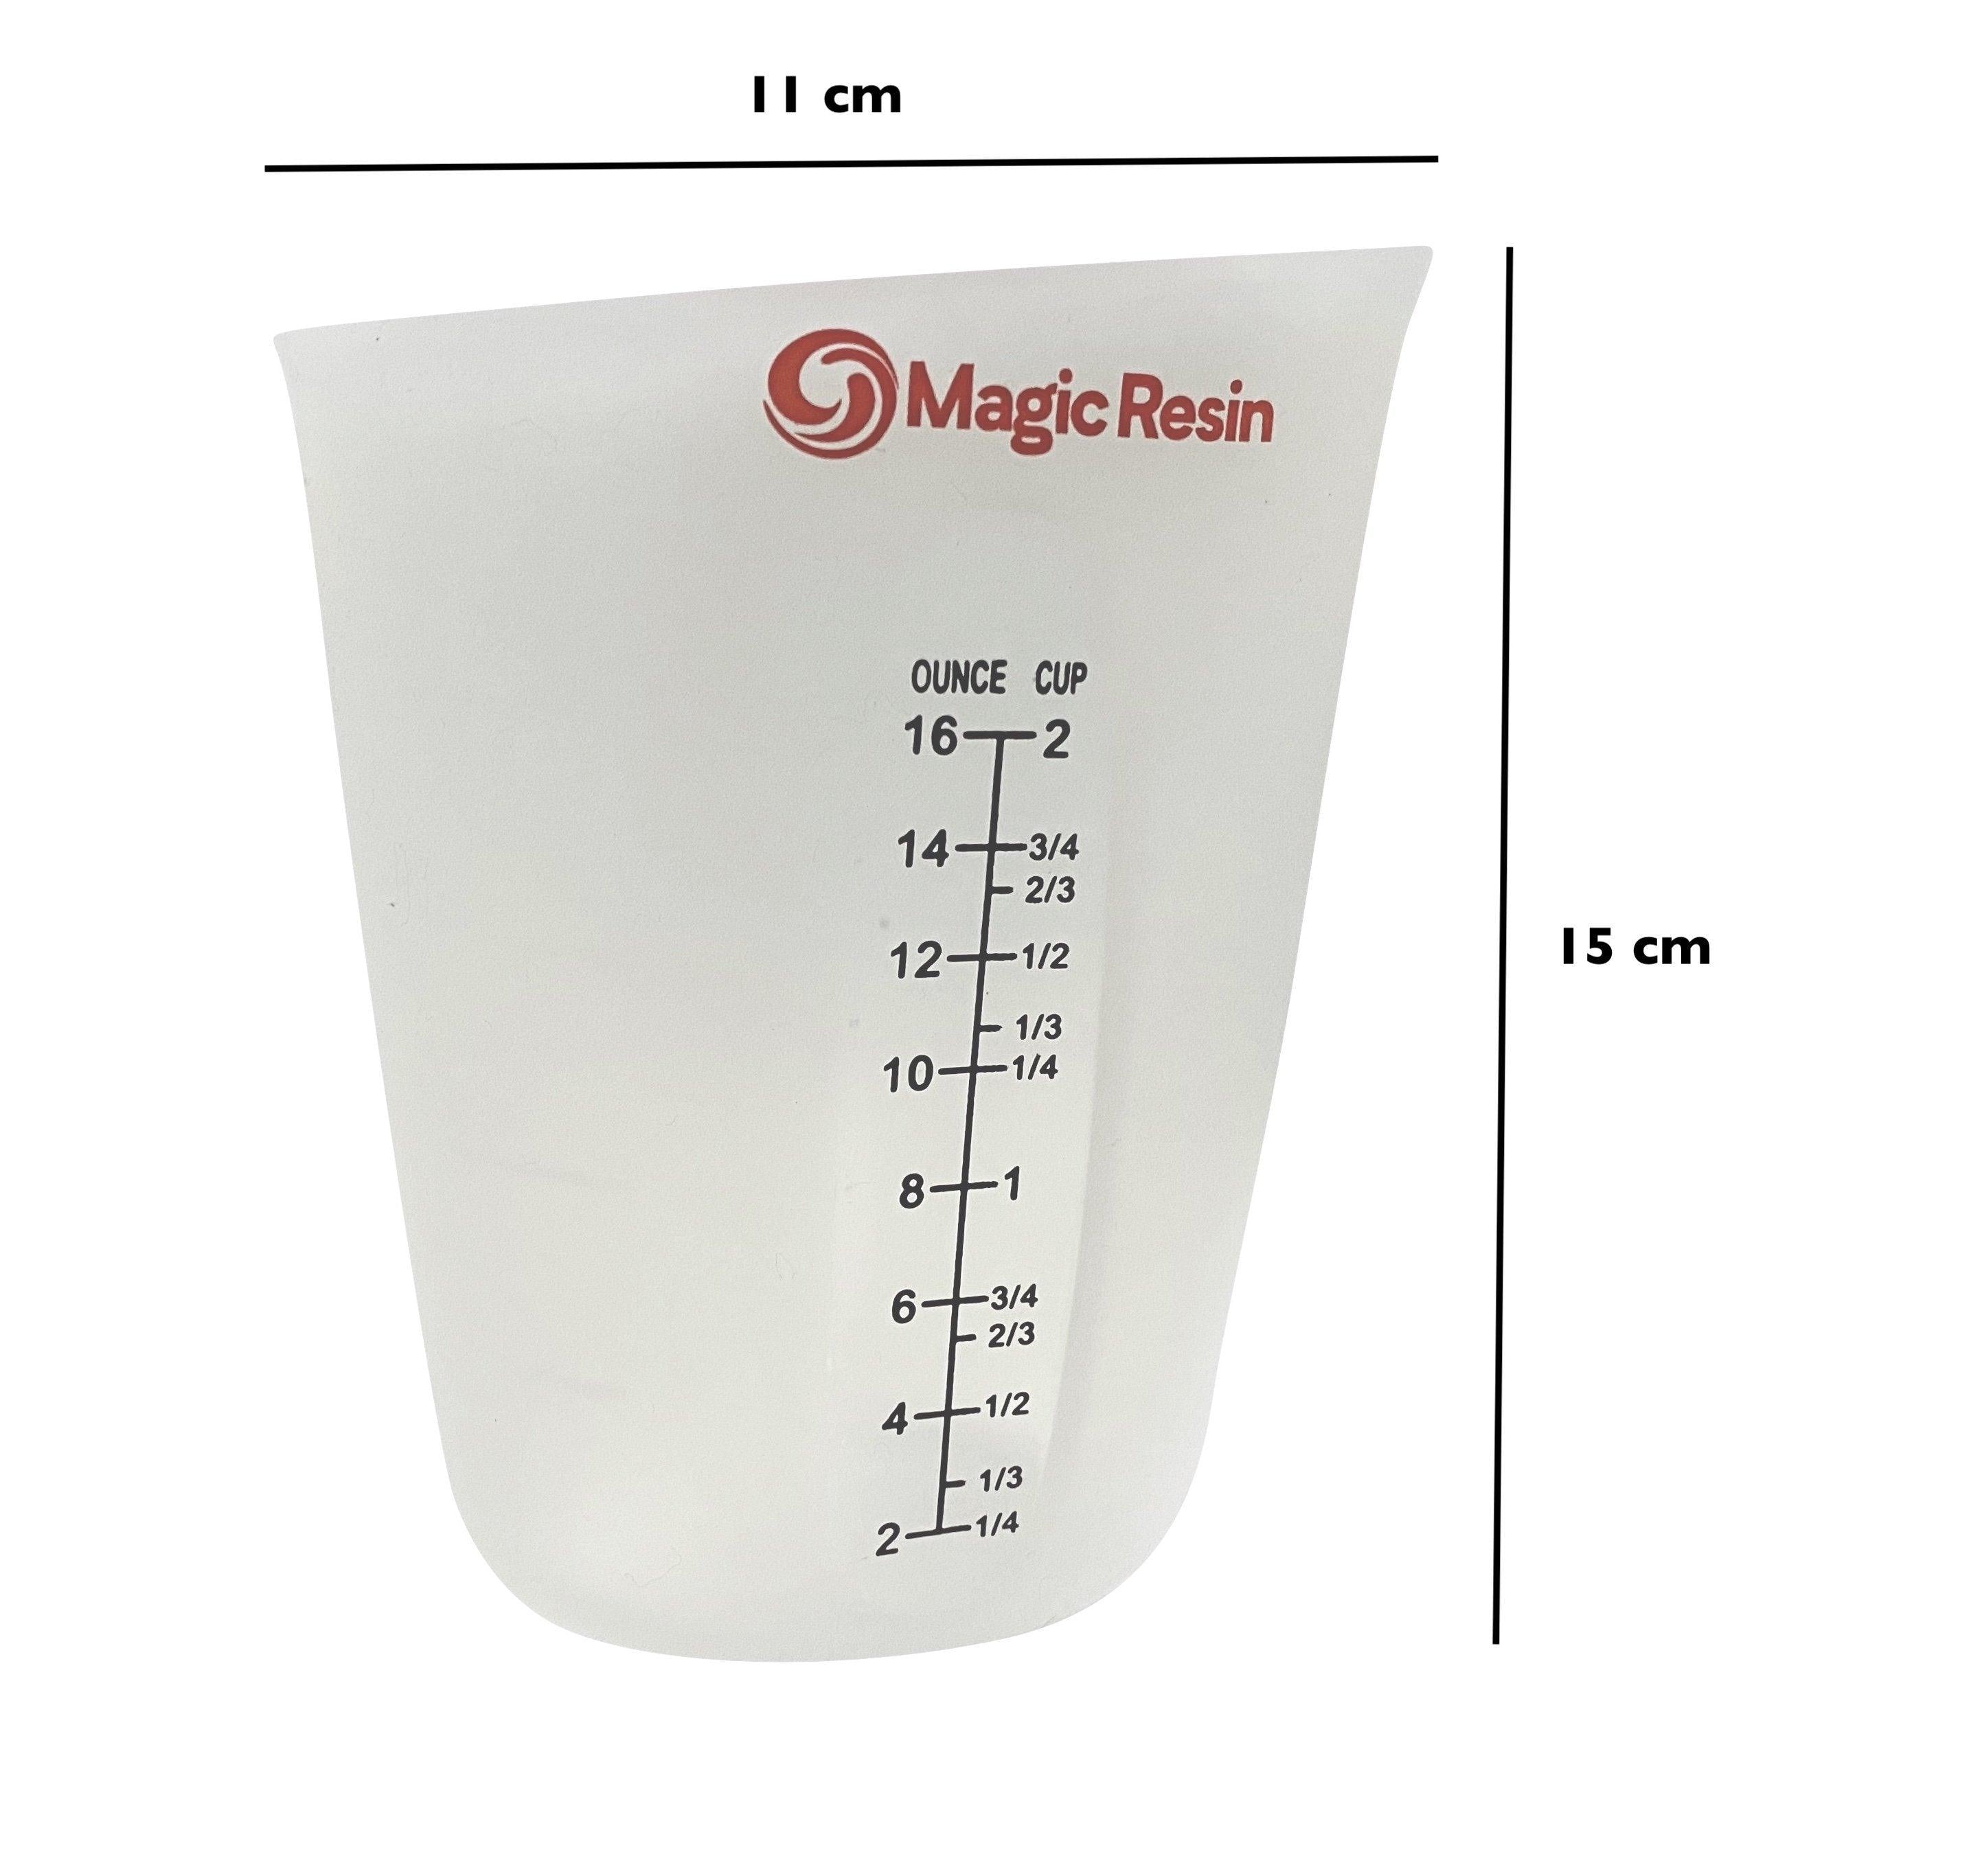 Silicone Flexible Measuring Cups Set for Epoxy Resin, Butter, Chocolate &  More - 2 Cup Melt Stir Squeeze & Pour - Dishwasher Safe - Standard & Metric  Measurment Markings 